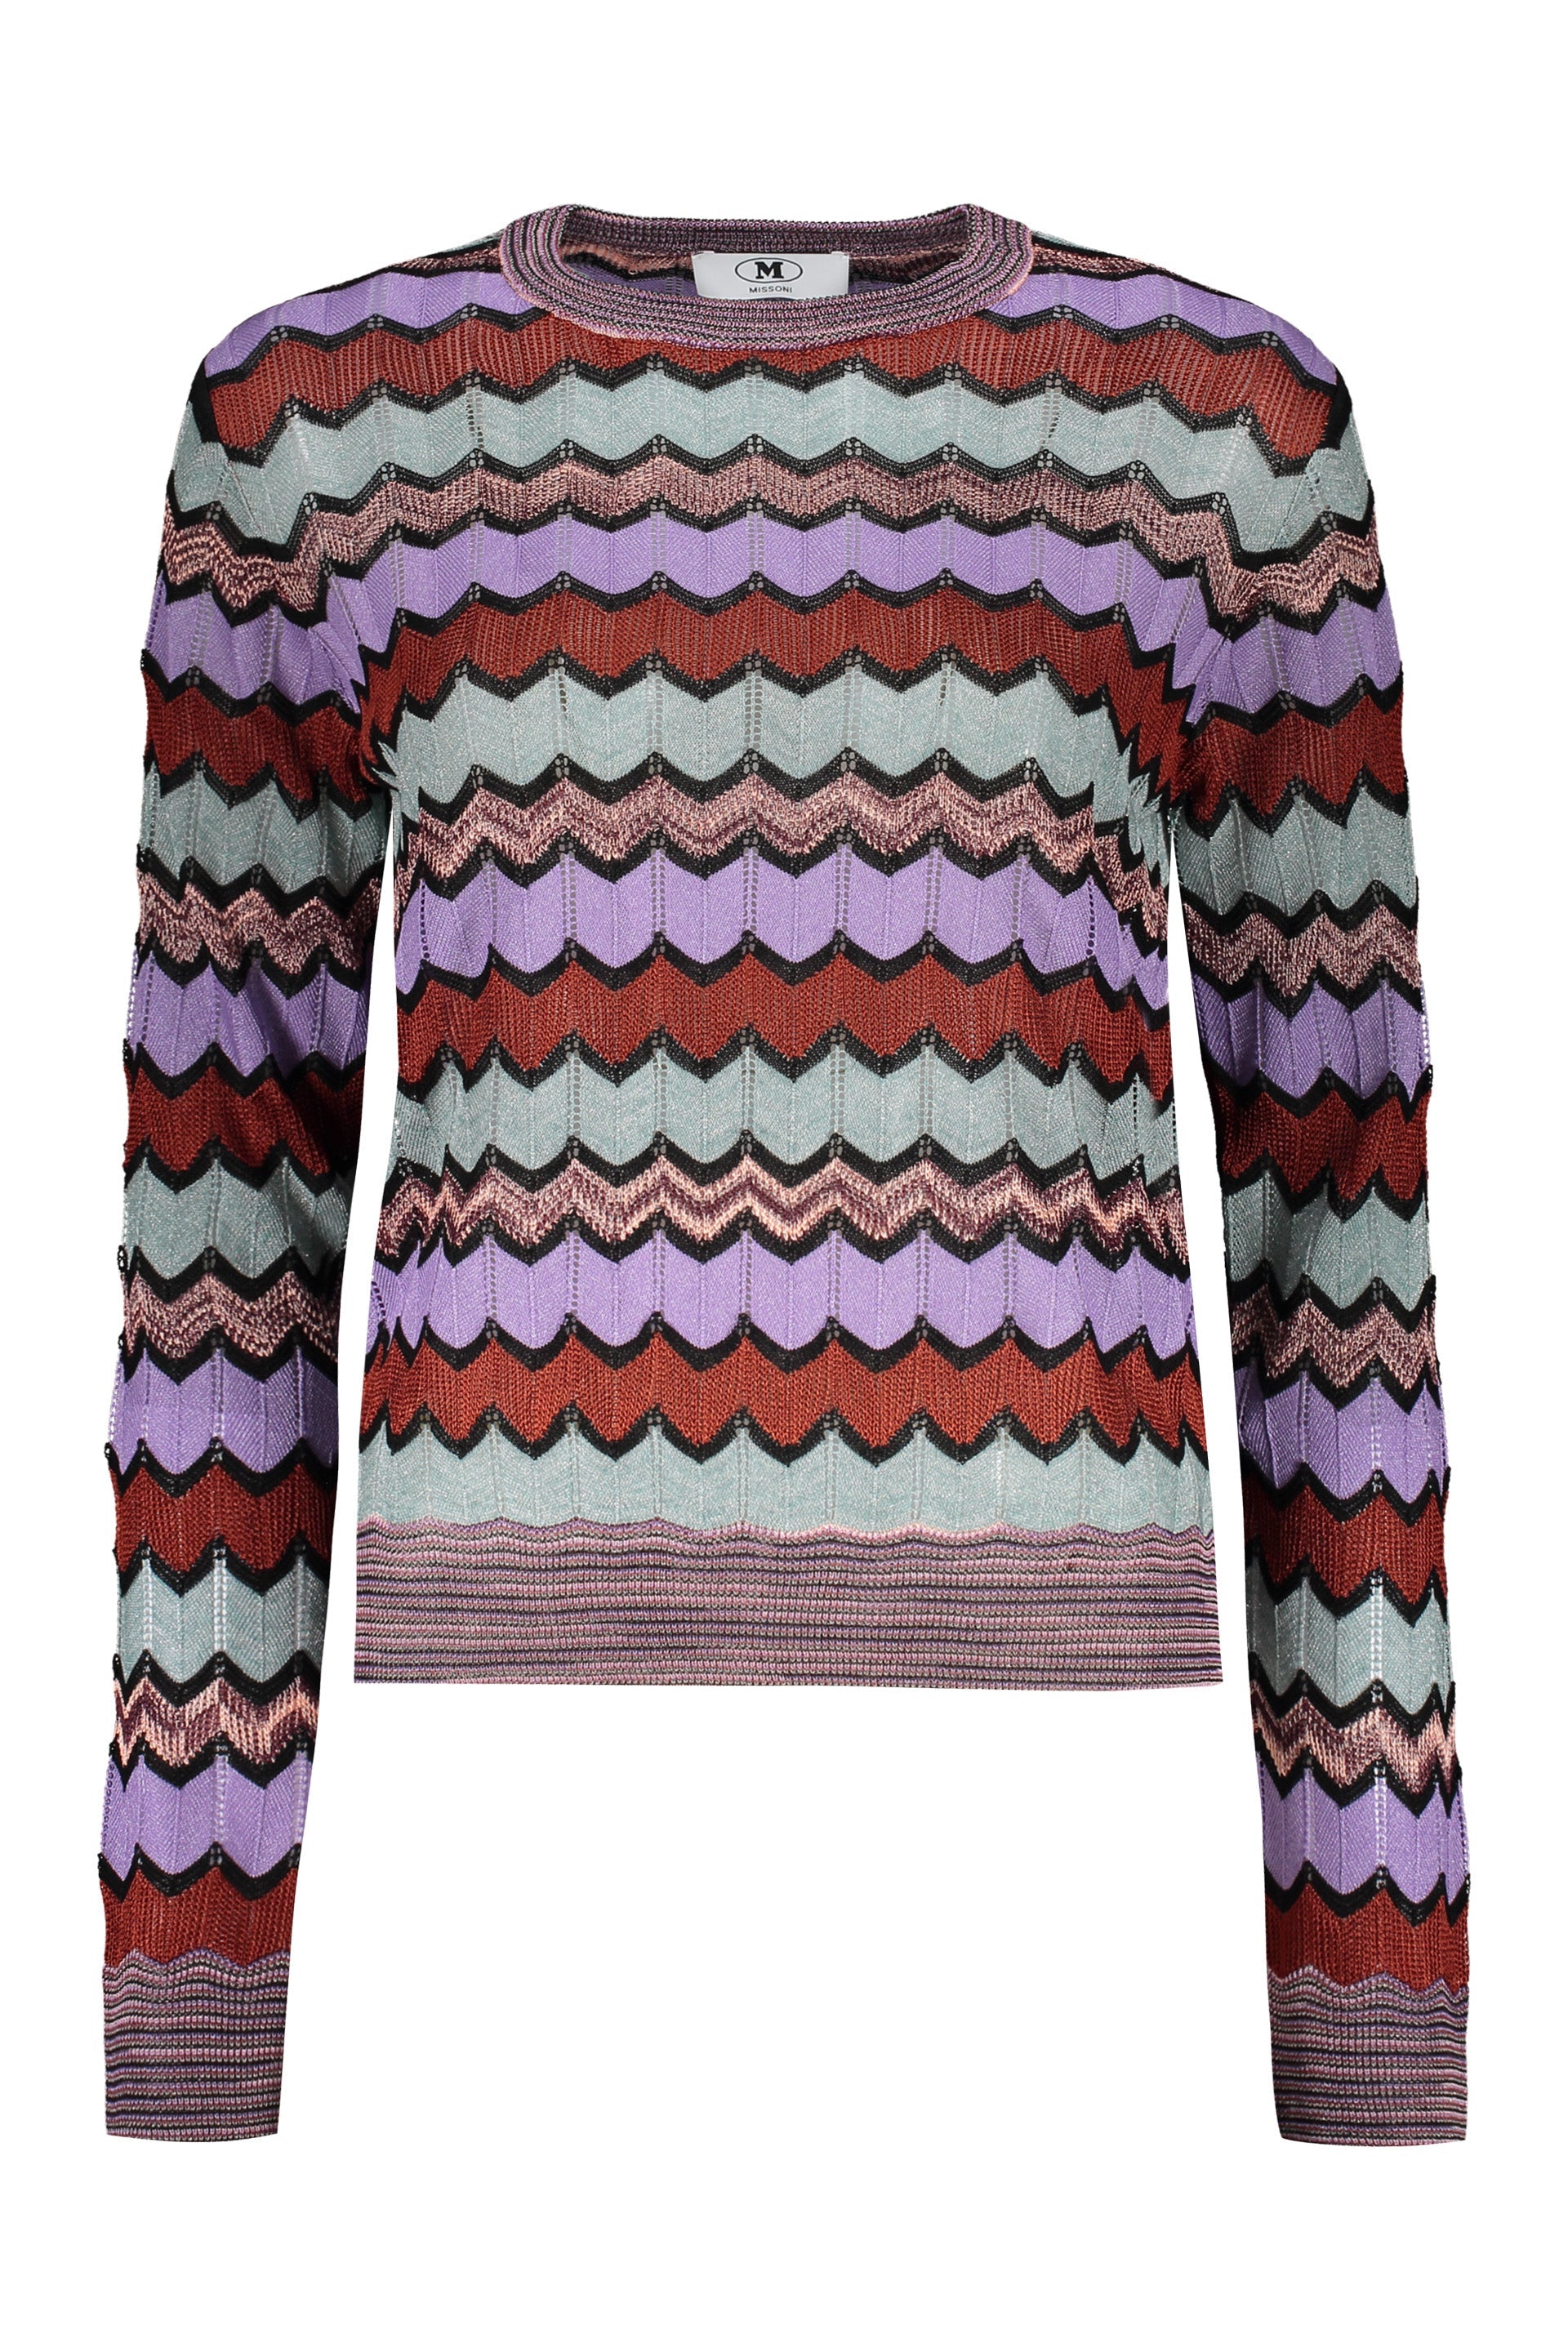 Missoni-OUTLET-SALE-Long-sleeve-crew-neck-sweater-Strick-L-ARCHIVE-COLLECTION_f93998f7-d0a6-48a8-b1c6-402a2f363c9a.jpg